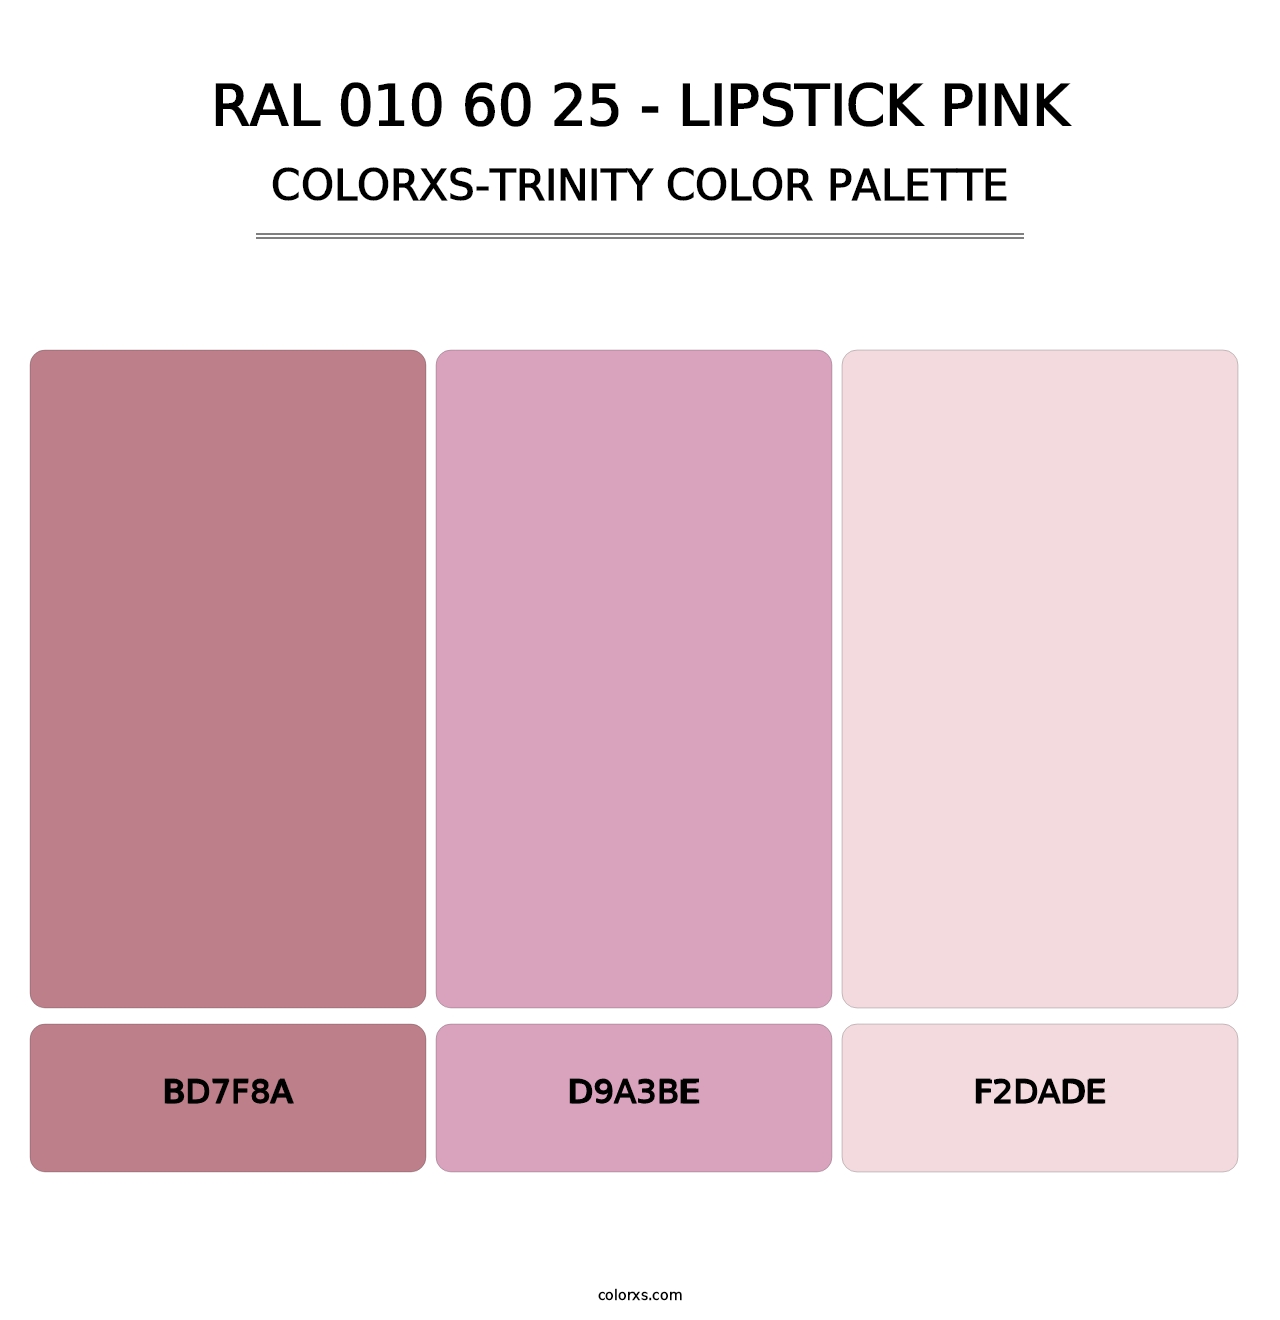 RAL 010 60 25 - Lipstick Pink - Colorxs Trinity Palette